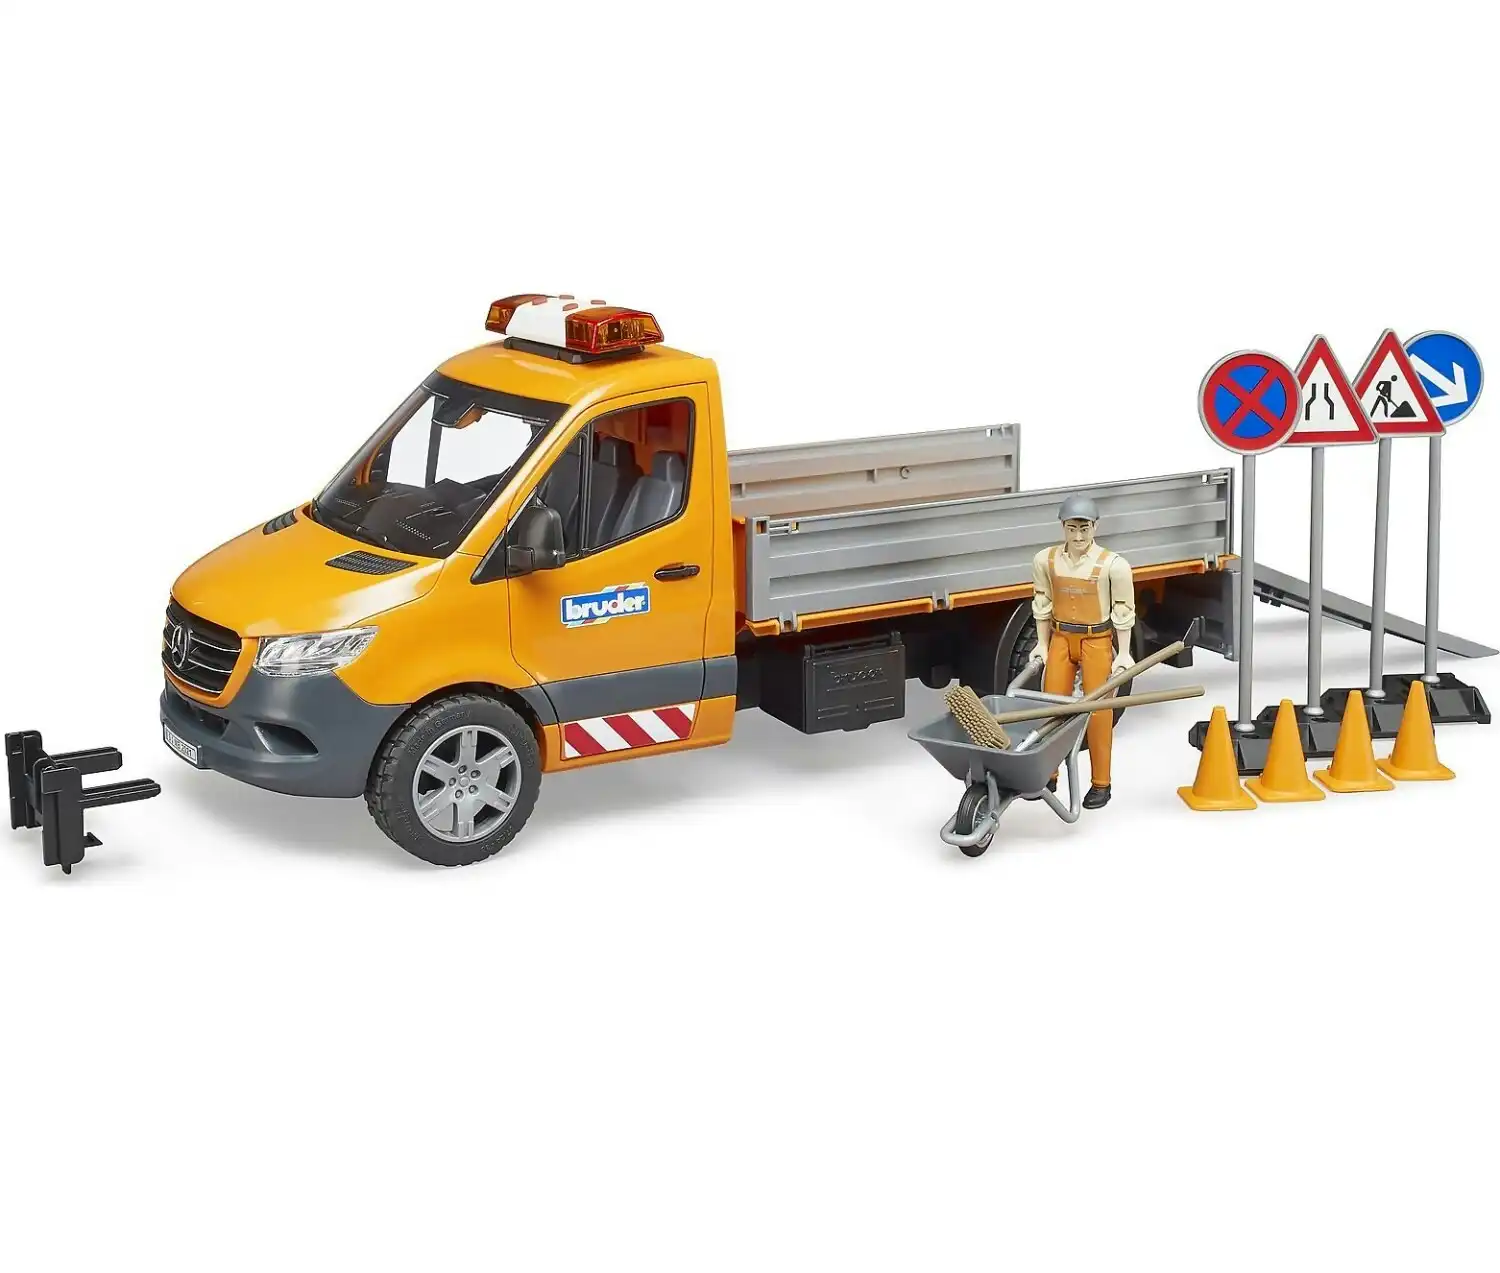 Bruder - Mercedes-benz Sprinter Municipal Vehicle Including Light And Sound Module Driver And Accessories 1:16 Scale